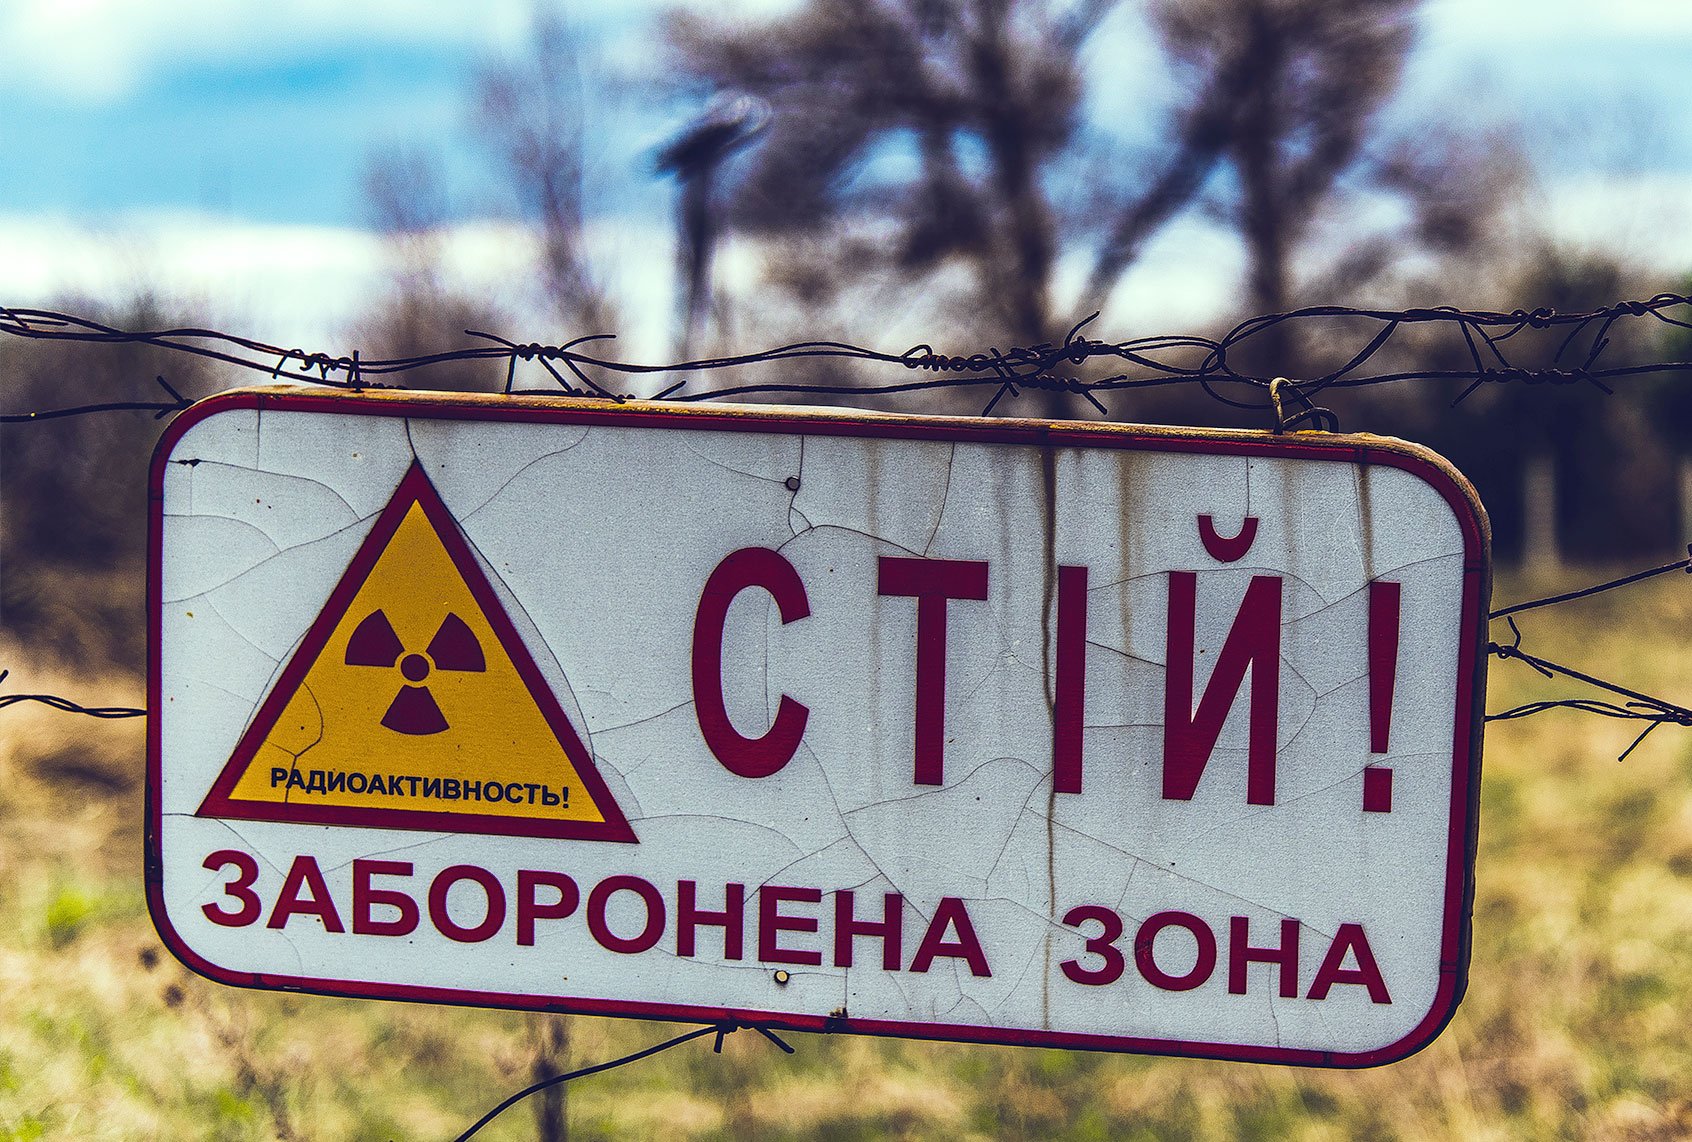 River dredging approach Chernobyl could per chance well ship radioactive destroy into water table, scientists warn